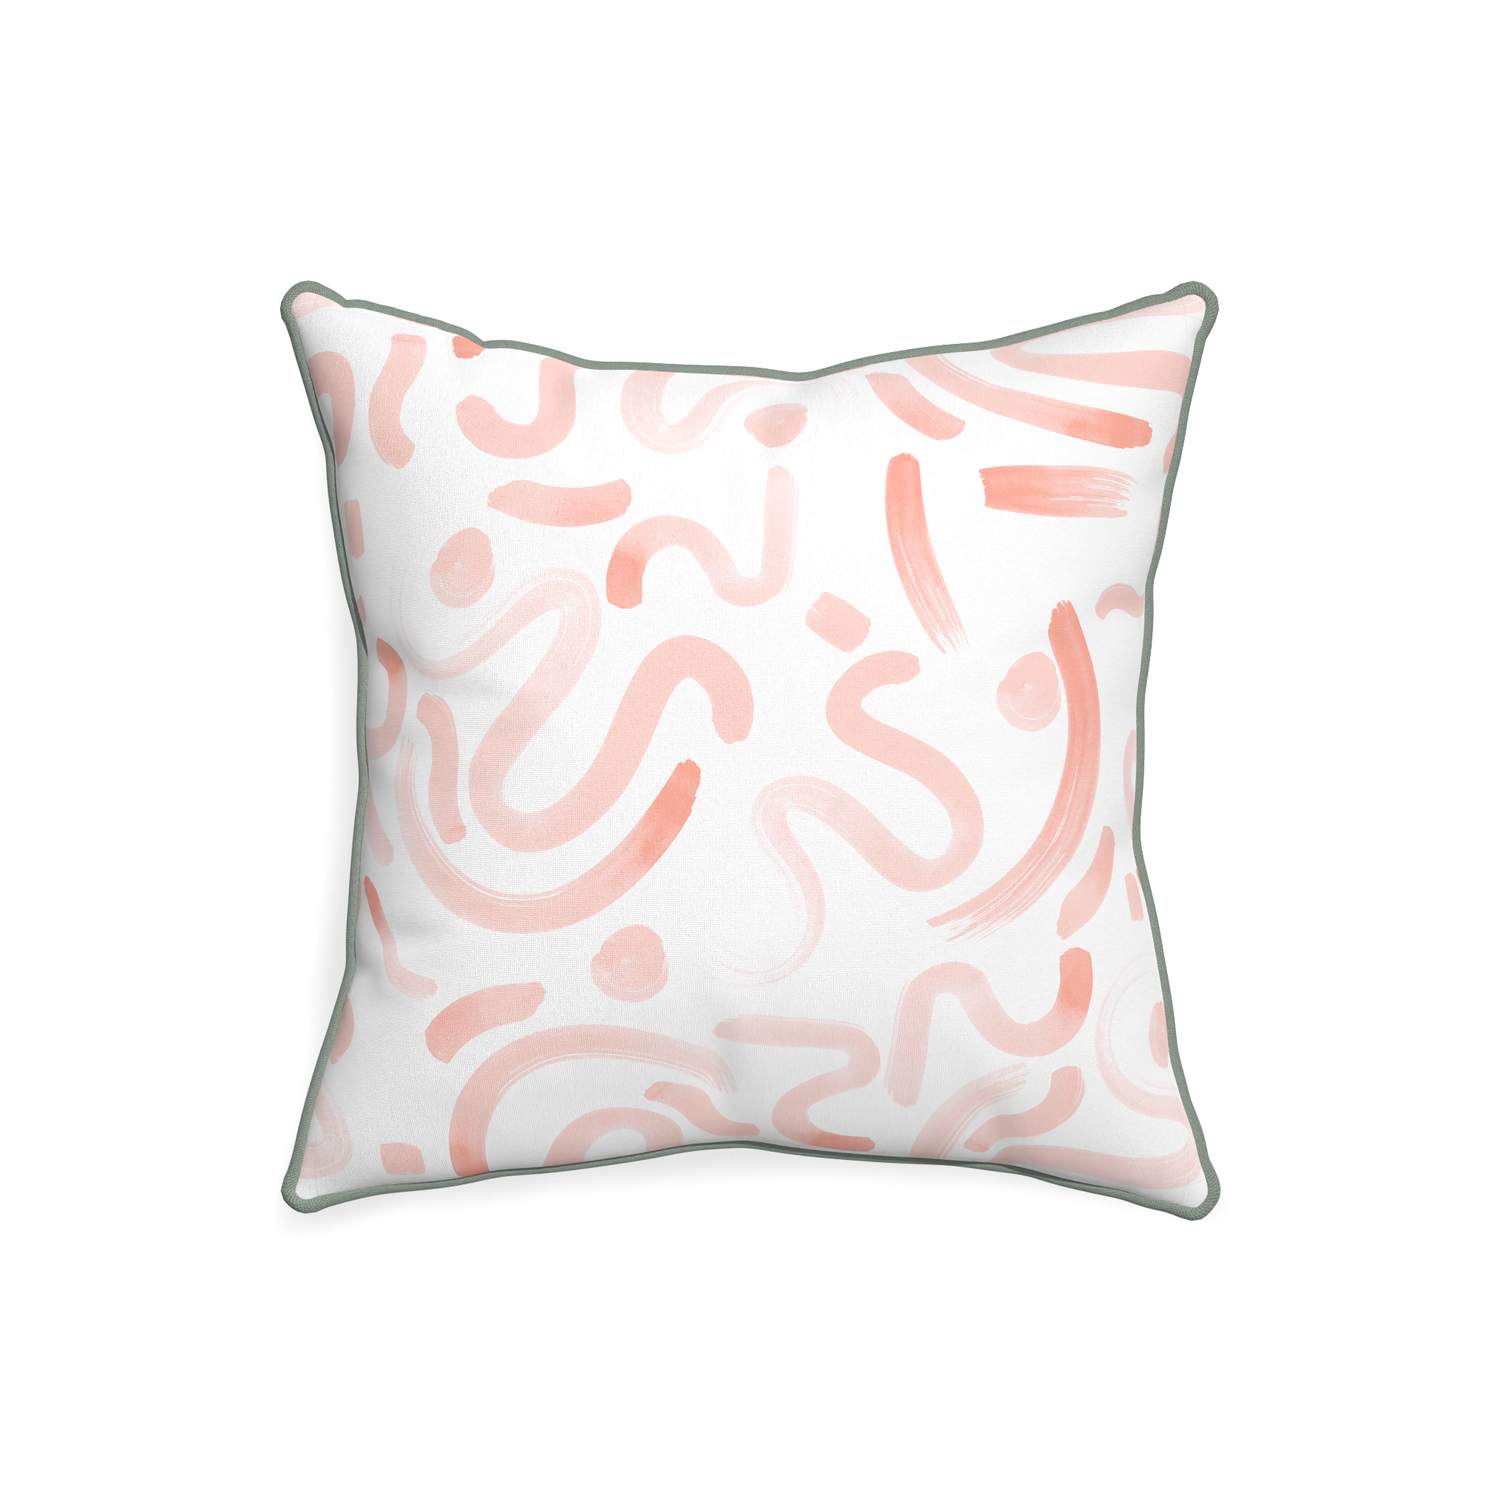 20-square hockney pink custom pink graphicpillow with sage piping on white background